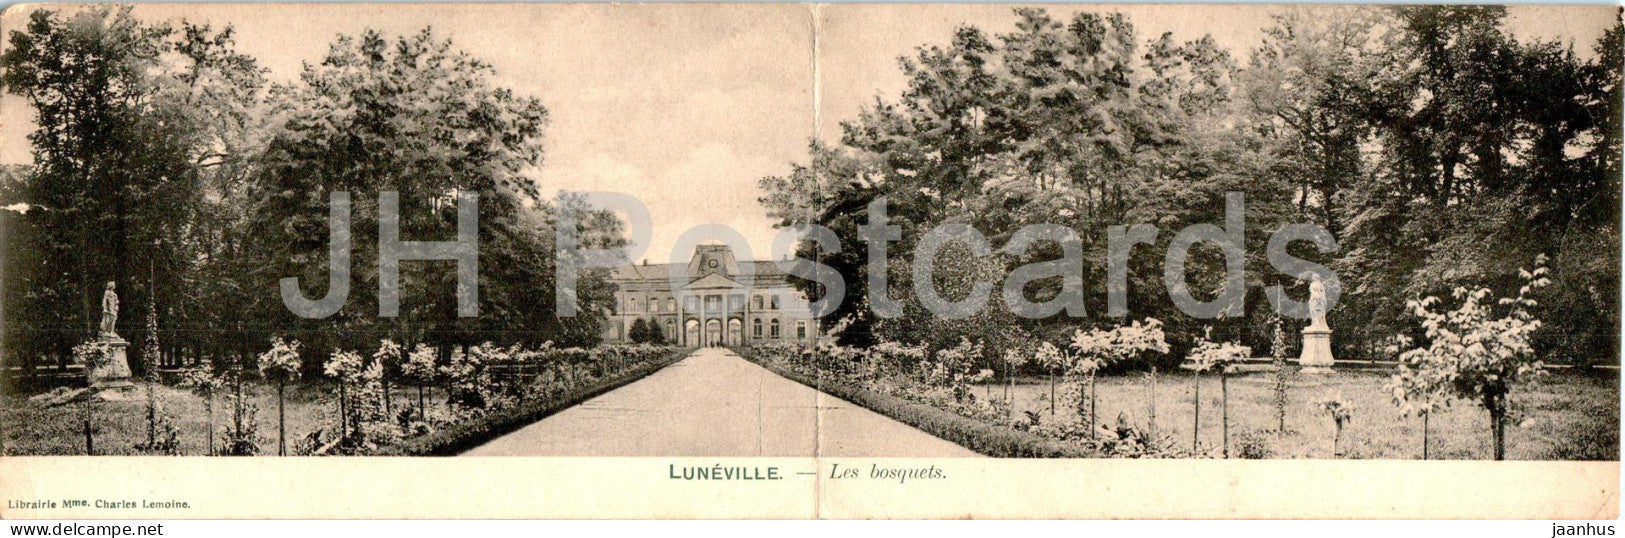 Luneville - Les bosquets - old postcard - 1905 - France - used - JH Postcards